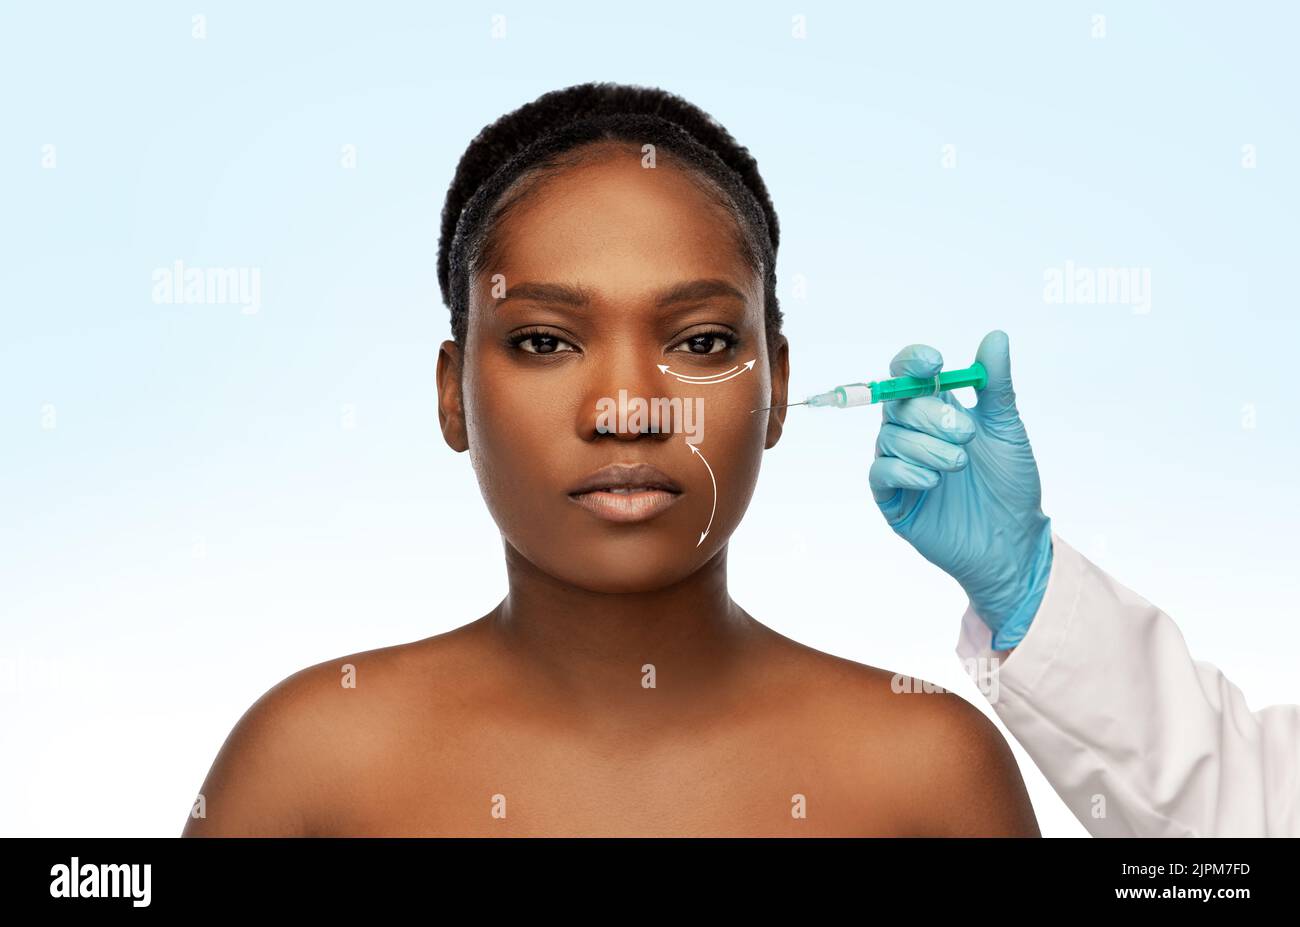 woman and plastic surgeon's hand with syringe Stock Photo